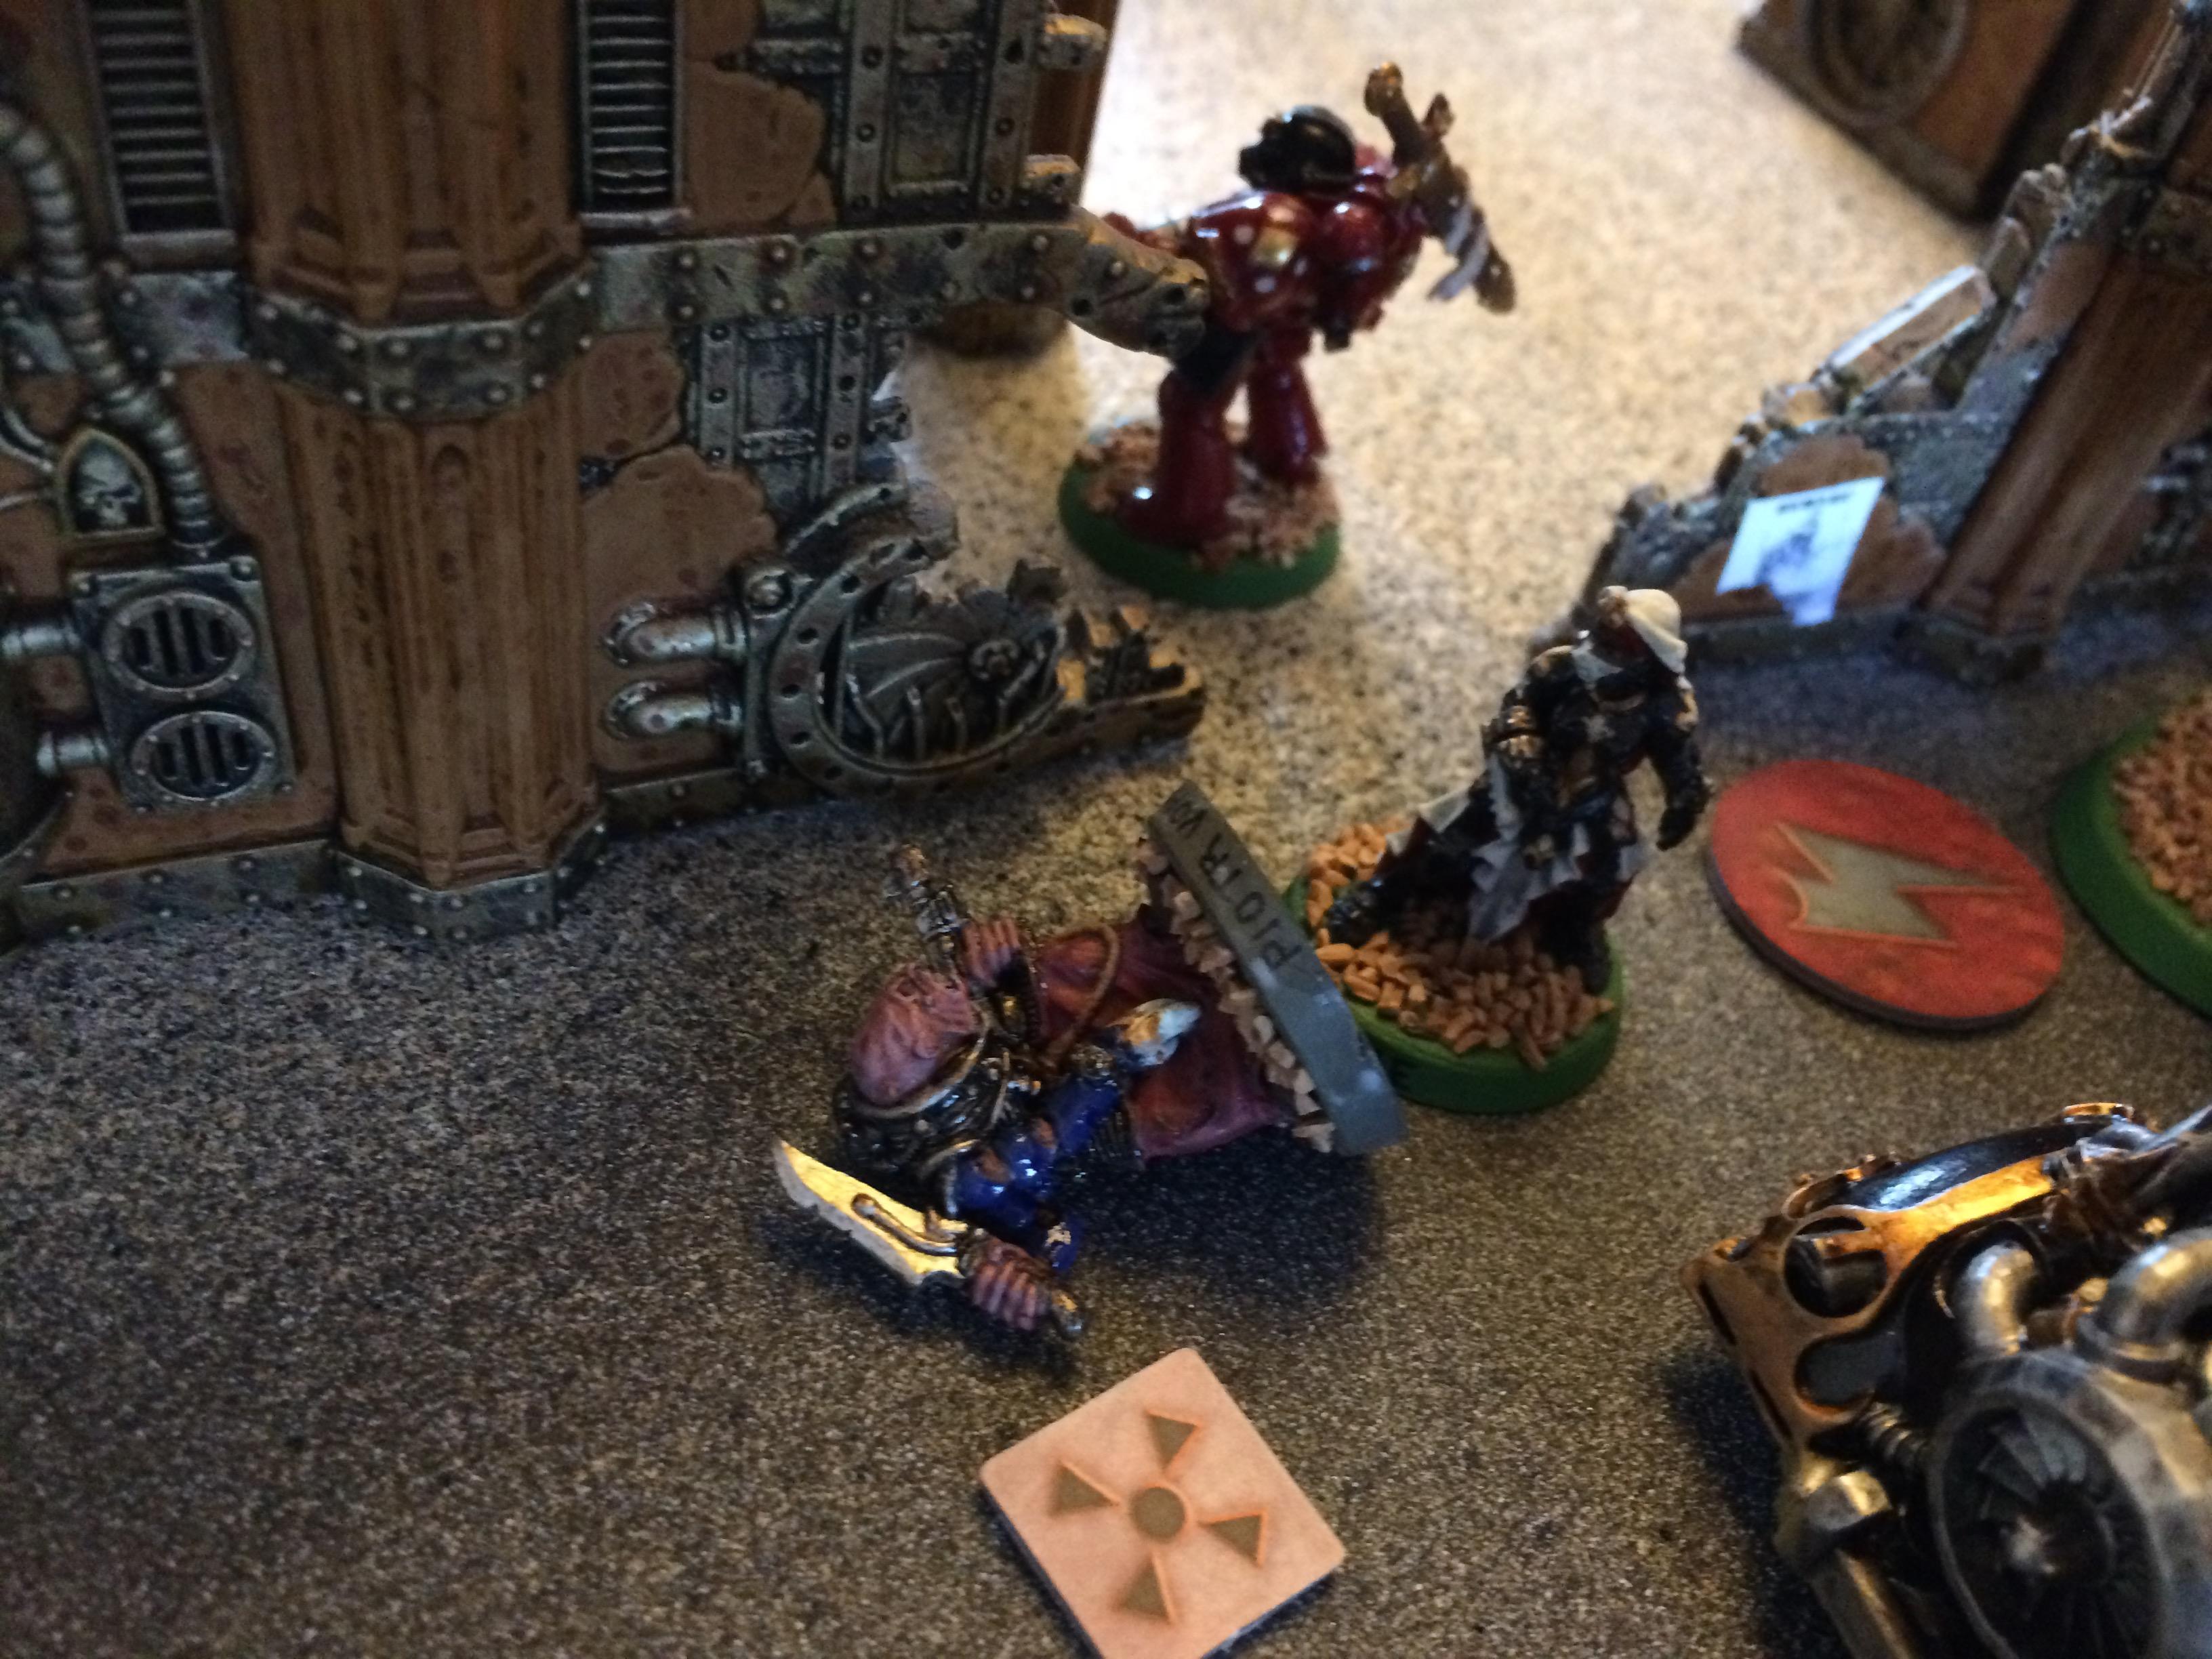 The agents take out their wrath on the remaining cultists